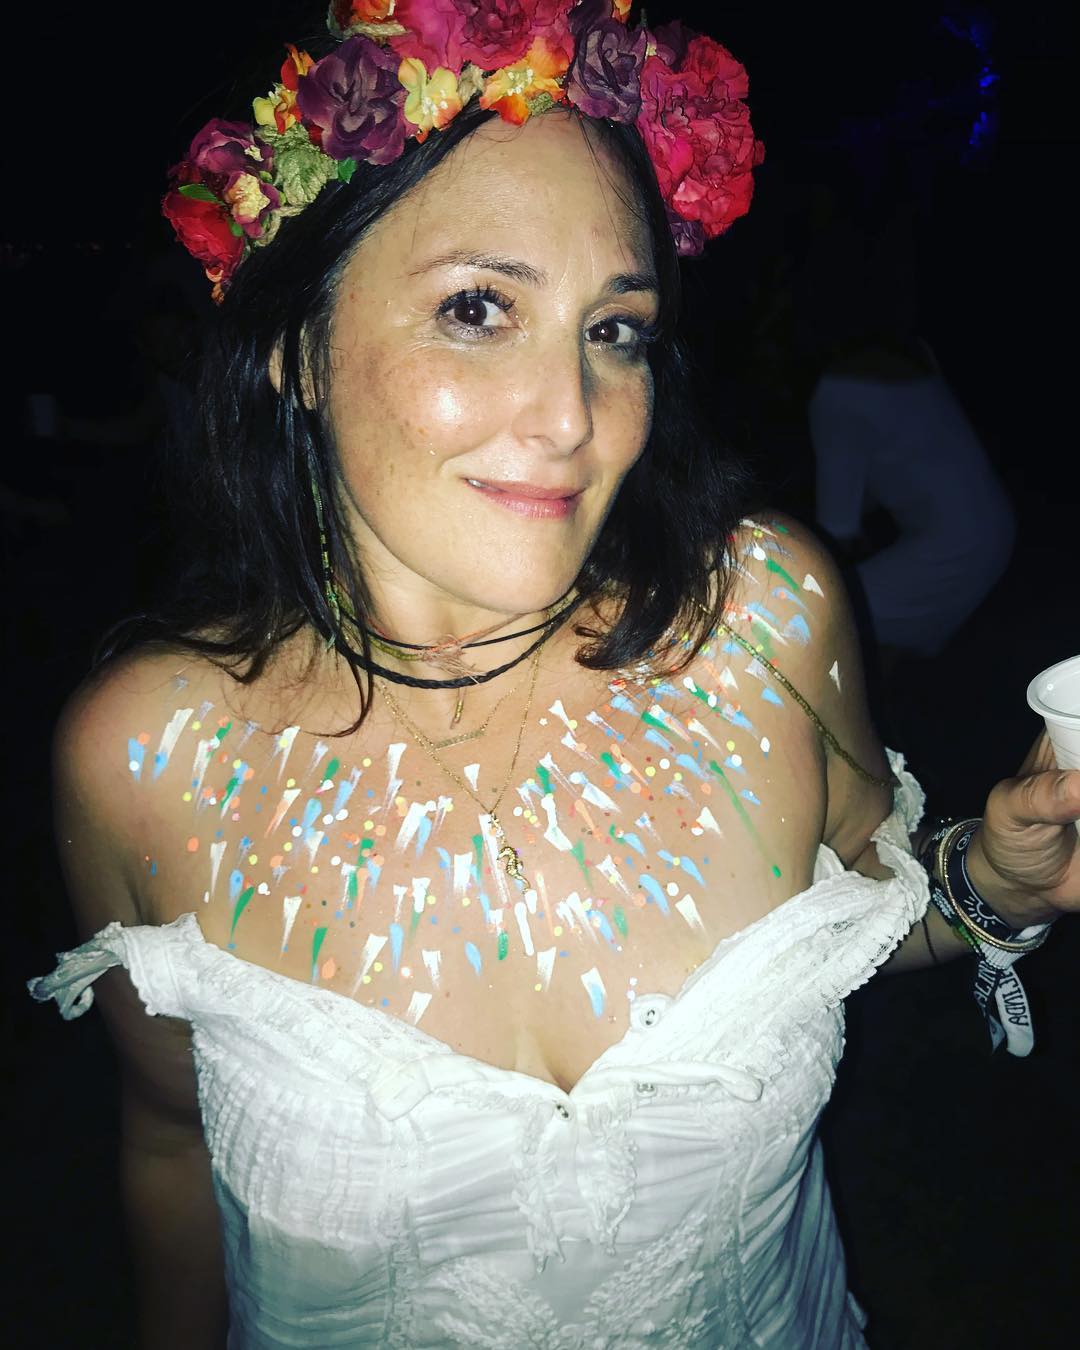 49 Hot Pictures Of Ricki Lake Which Are Really A Sexy Slice From Heaven | Best Of Comic Books